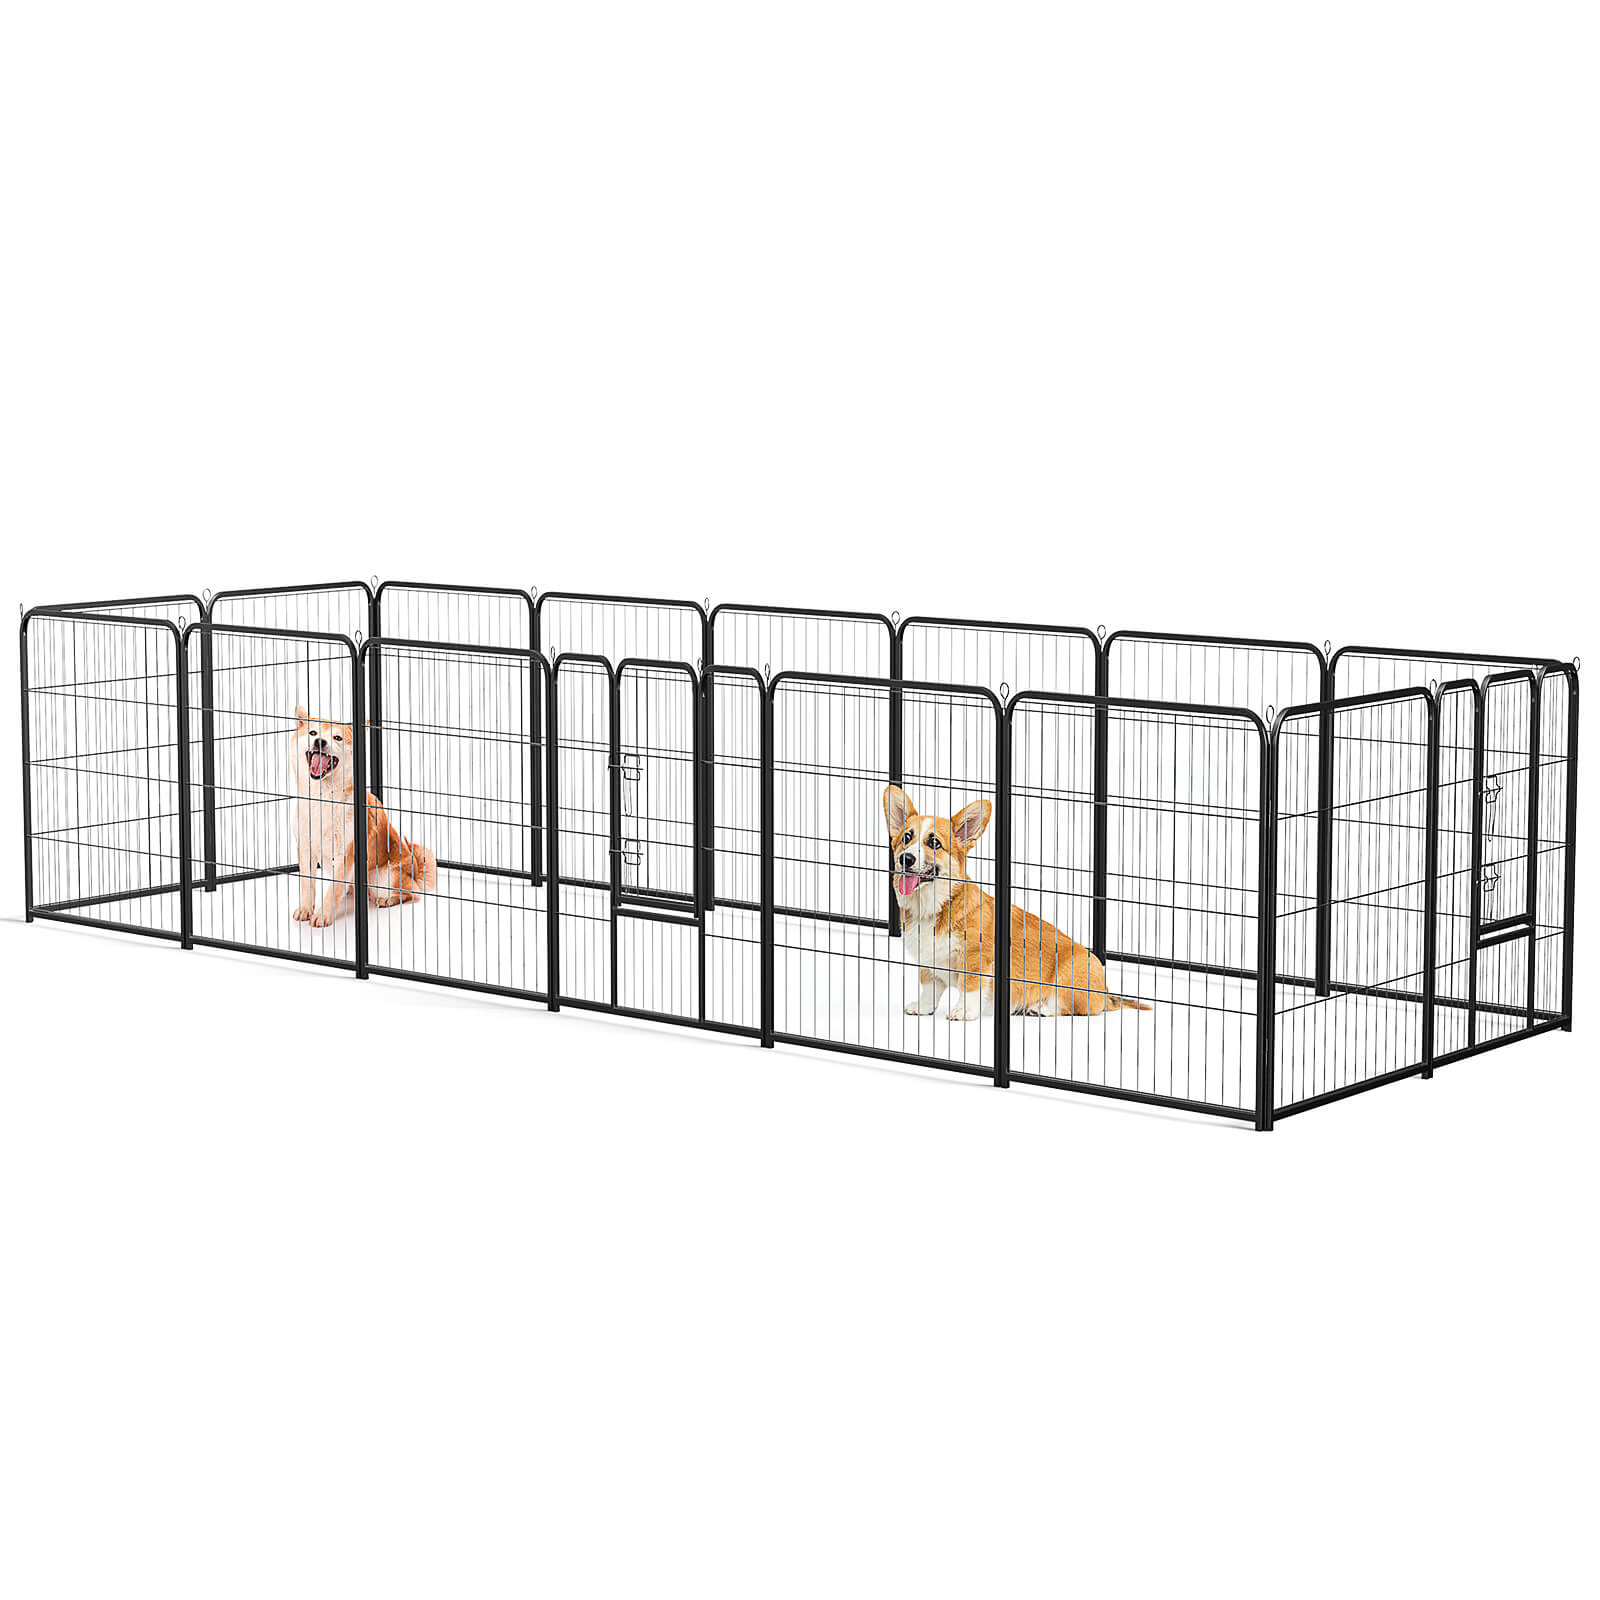 Dog Playpen - Collapsible Portable Pet Pen, High Metal Sport Puppy Pen with Gate for Garden, Patio, RV Camping